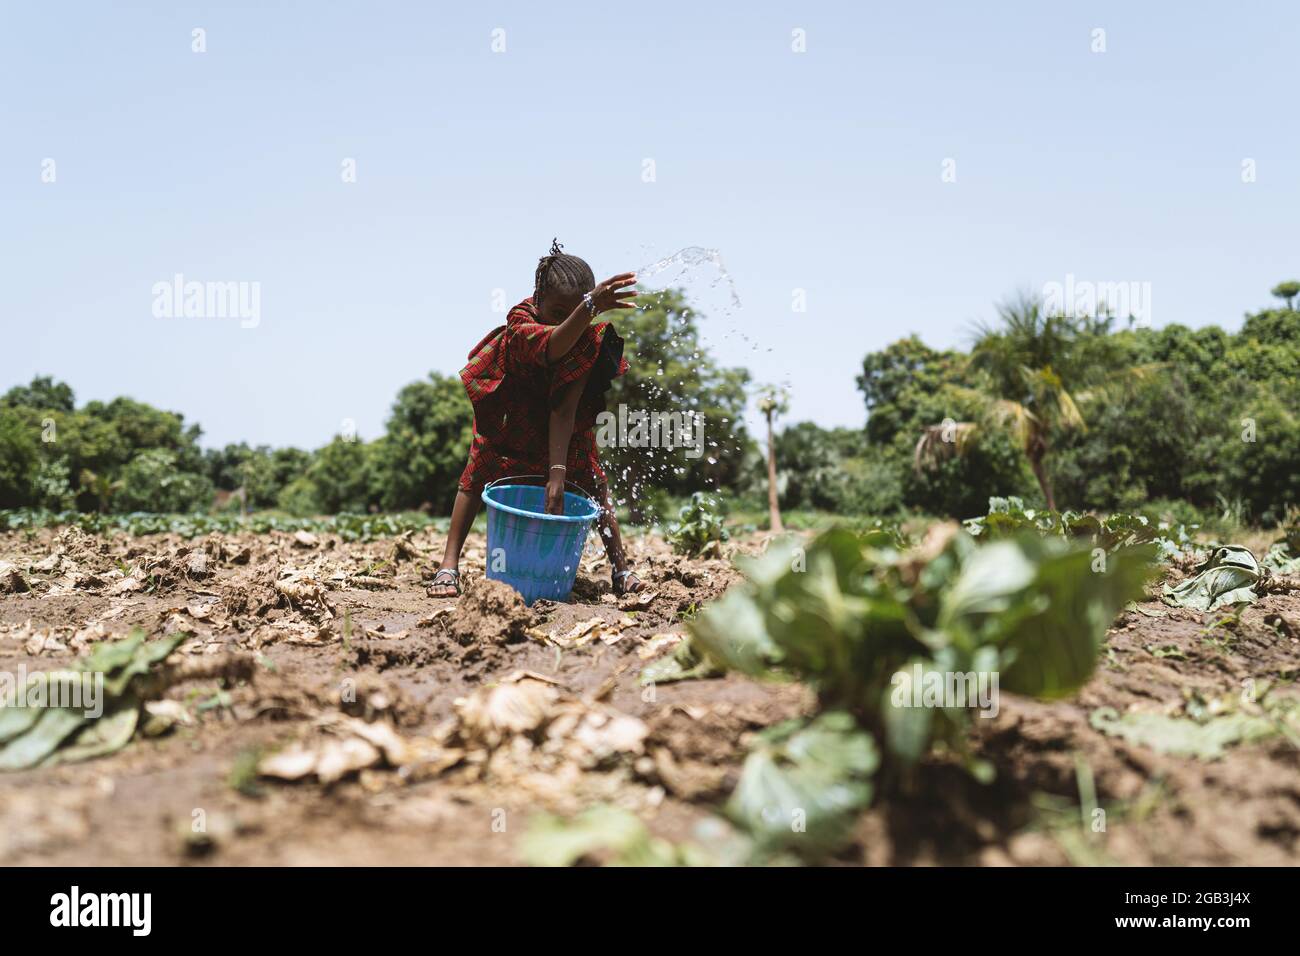 In this image, a little african girl is splattering water on dry cabbage plants by hand under a cloudless blu skyclouodless, Stock Photo